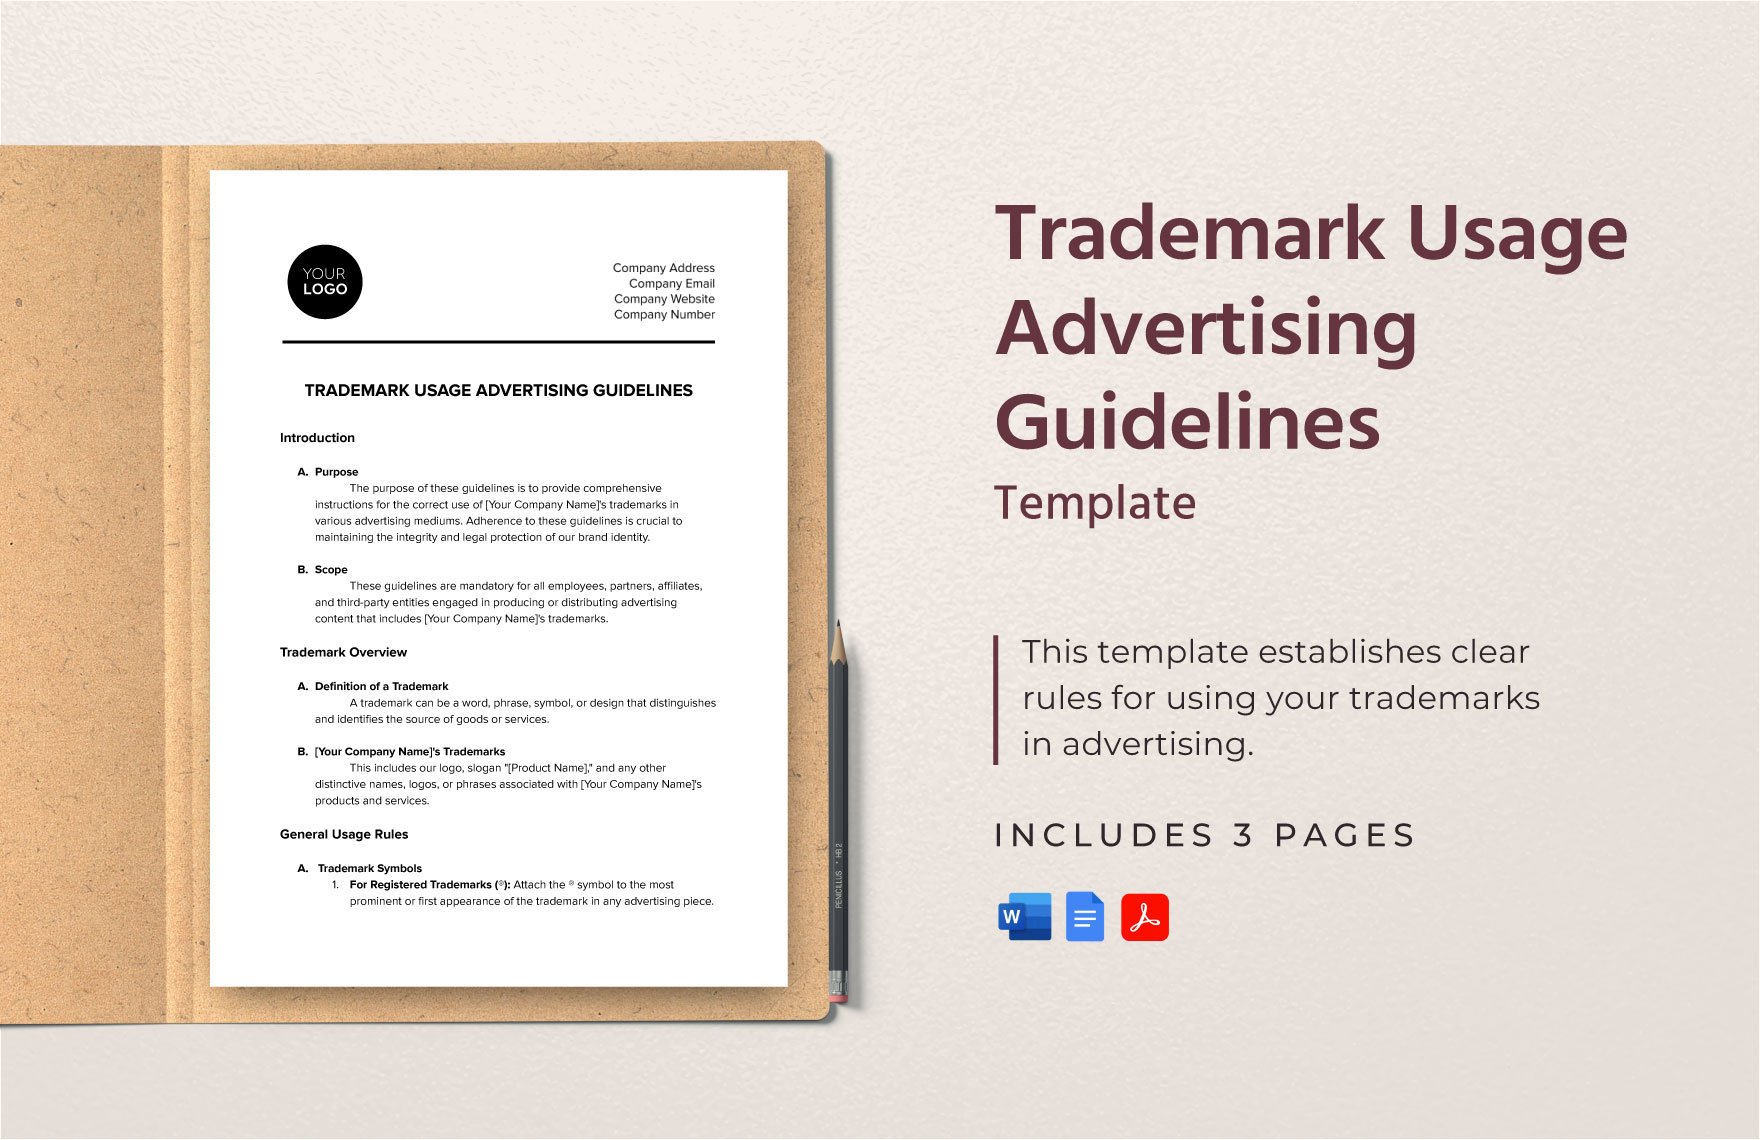 Trademark Usage Advertising Guidelines Template in Word, Google Docs, PDF